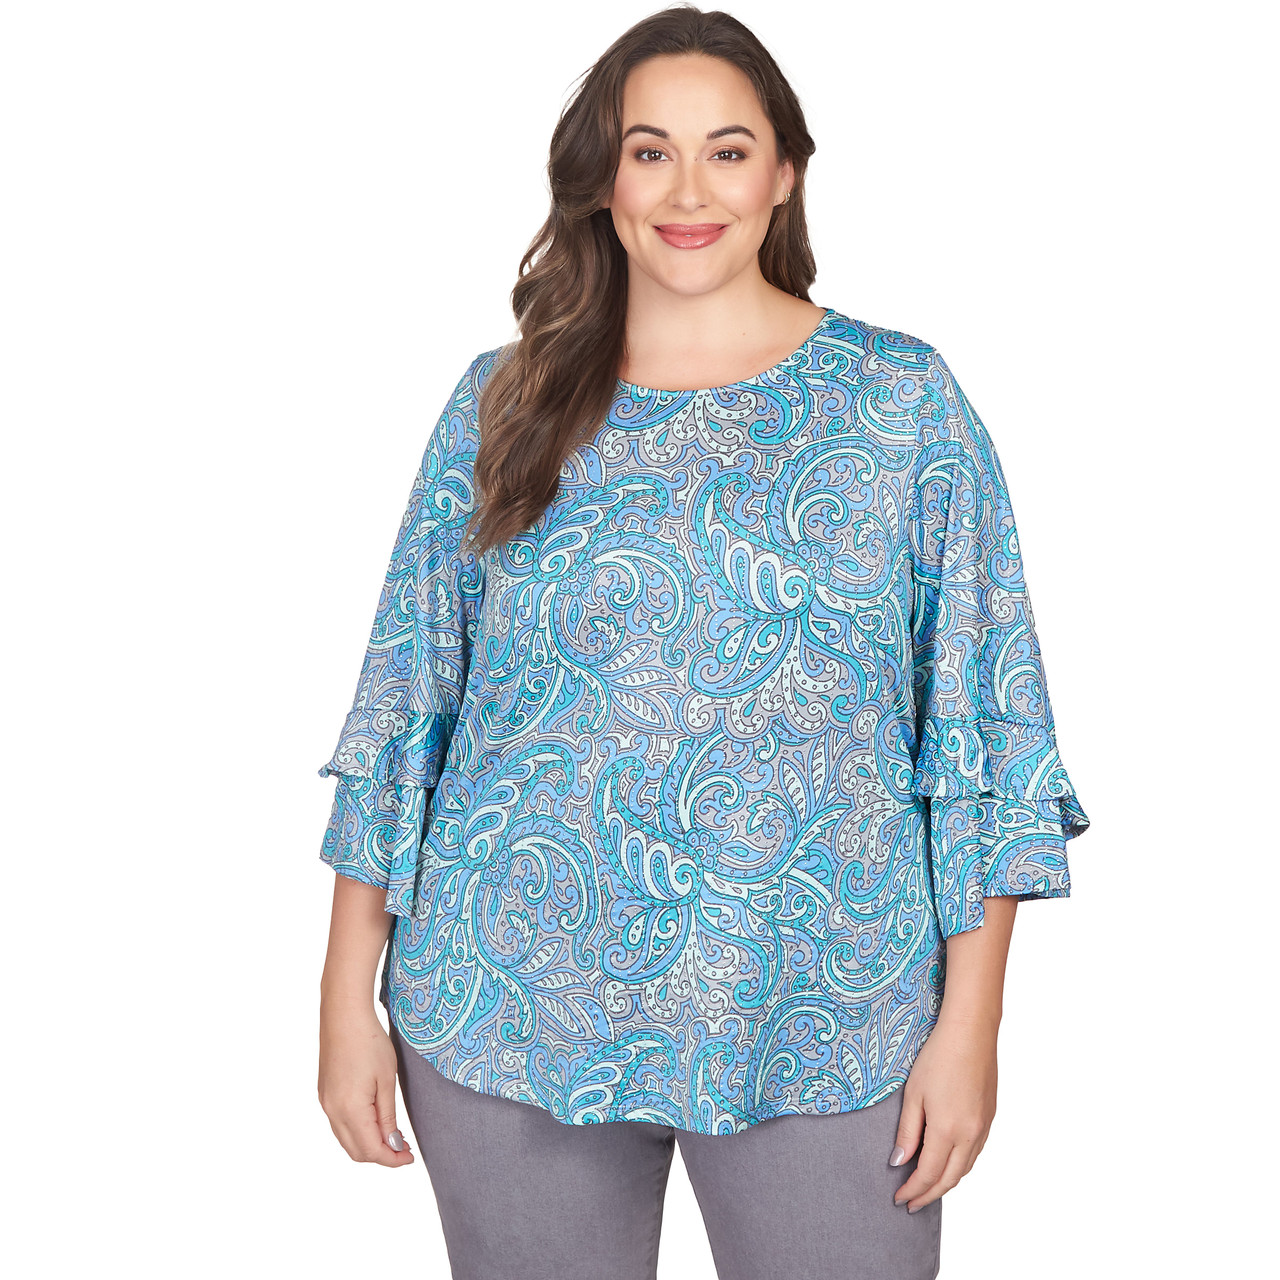 Plus Women's Paisley Dew Drop Knit Top with Ruffle Sleeves | Ruby Rd.